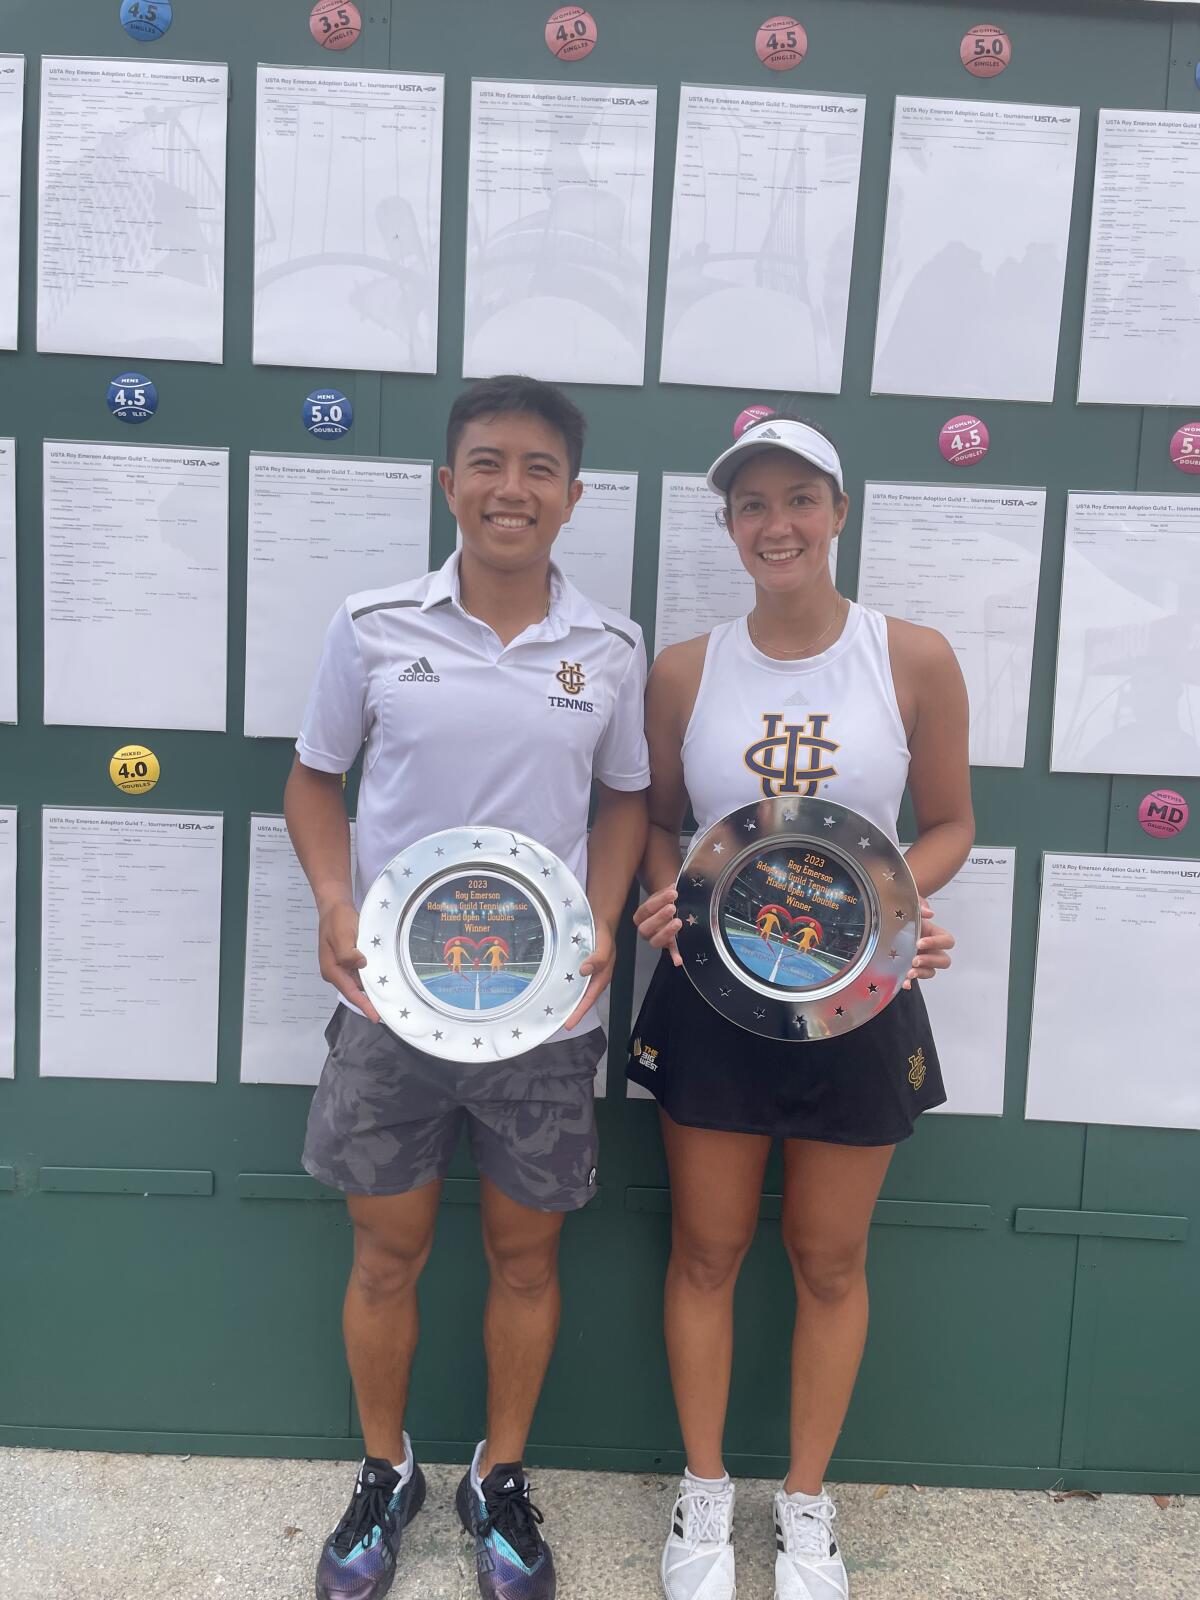 Matthew Sah and Alyssia Fossorier of UC Irvine won the Adoption Guild mixed doubles title.